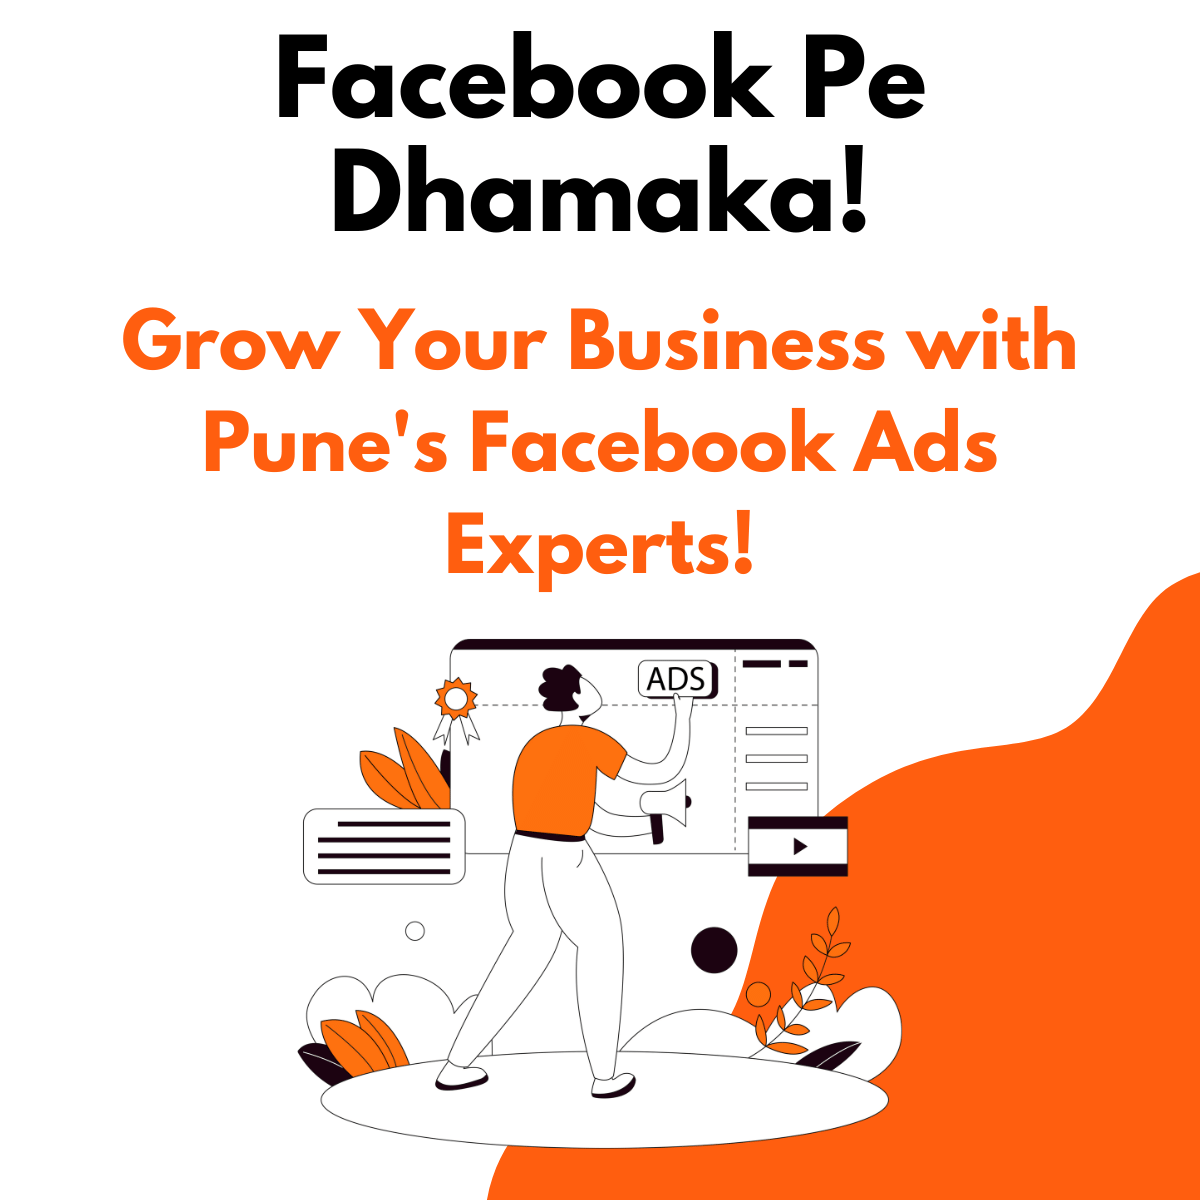 Facebook Pe Dhamaka! Grow Your Business with Pune's Facebook Ads Experts!